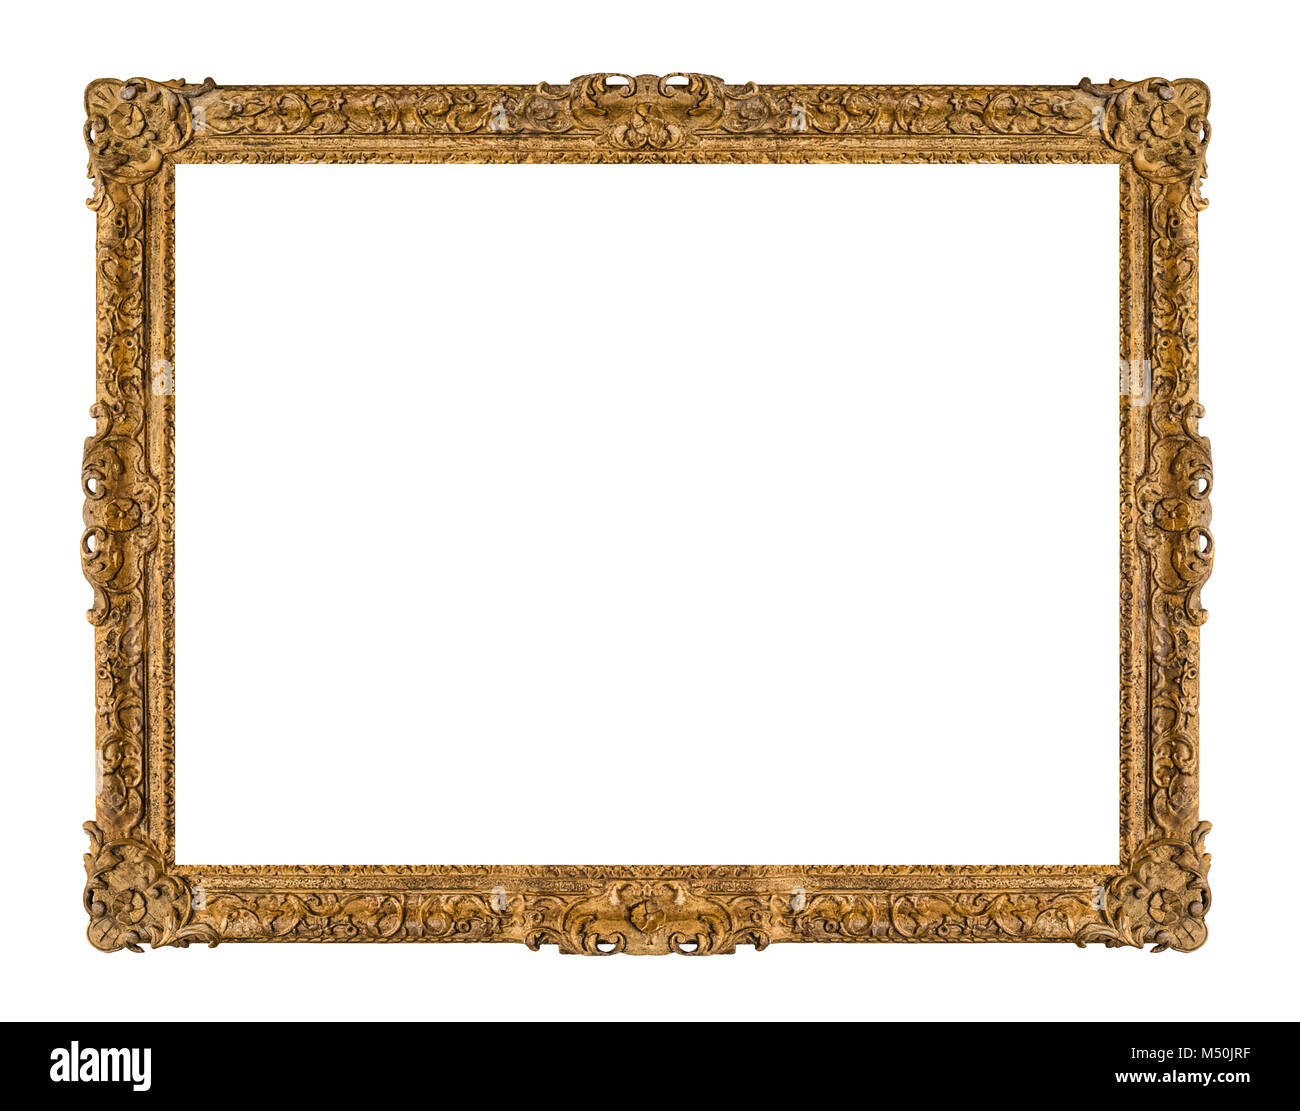 Old wooden picture frame Stock Photo